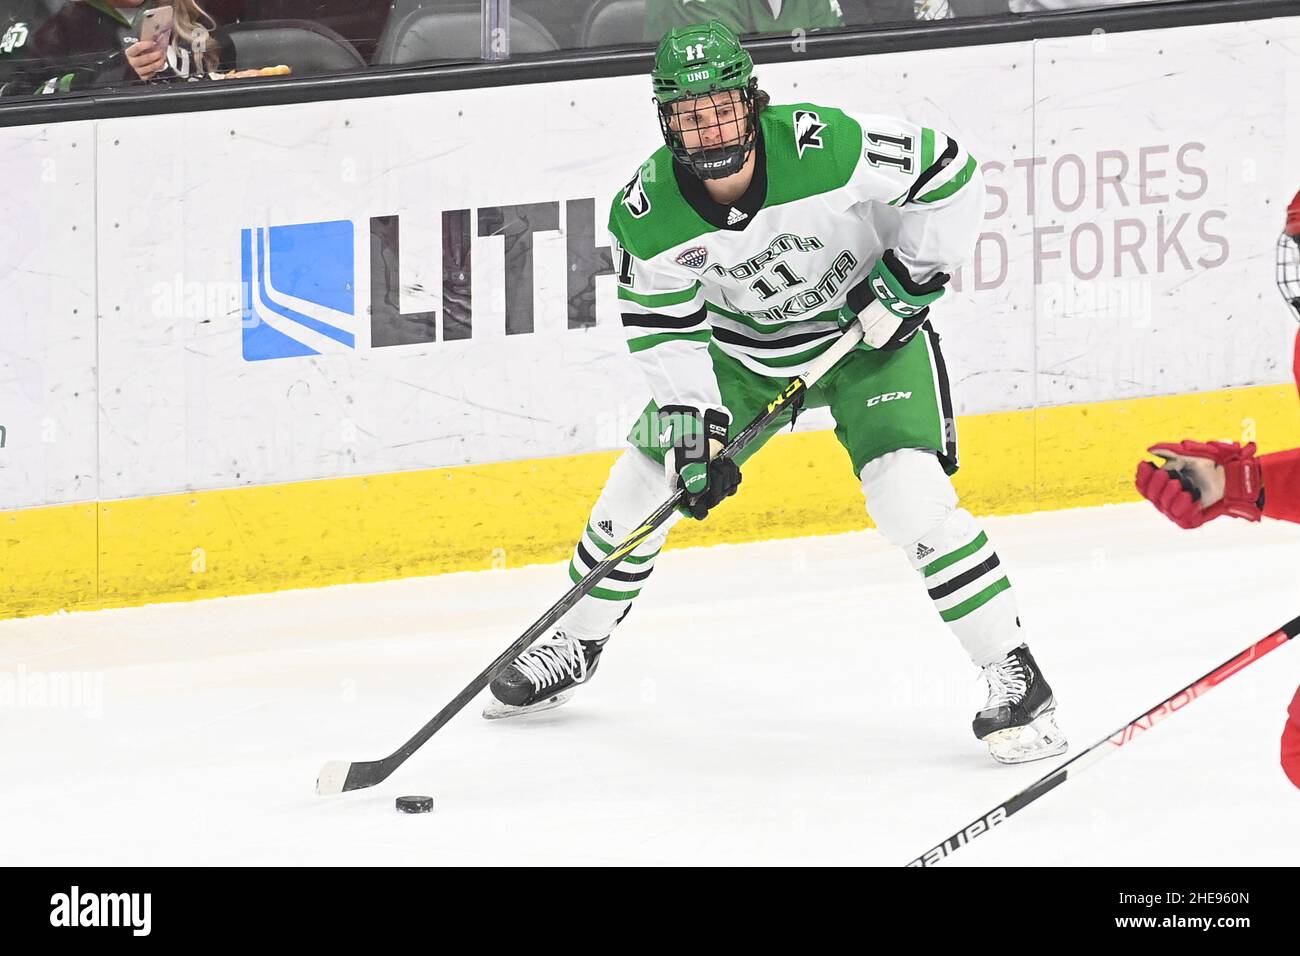 North Dakota Fighting Hawks forward Griffin Ness (11) skates with the puck during a NCAA men's hockey game between the Cornell University Big Red and the University of North Dakota Fighting Hawks at Ralph Engelstad Arena, Grand Forks, ND on Saturday, January 8, 2022. Cornell wins 3-1. By Russell Hons/CSM Stock Photo